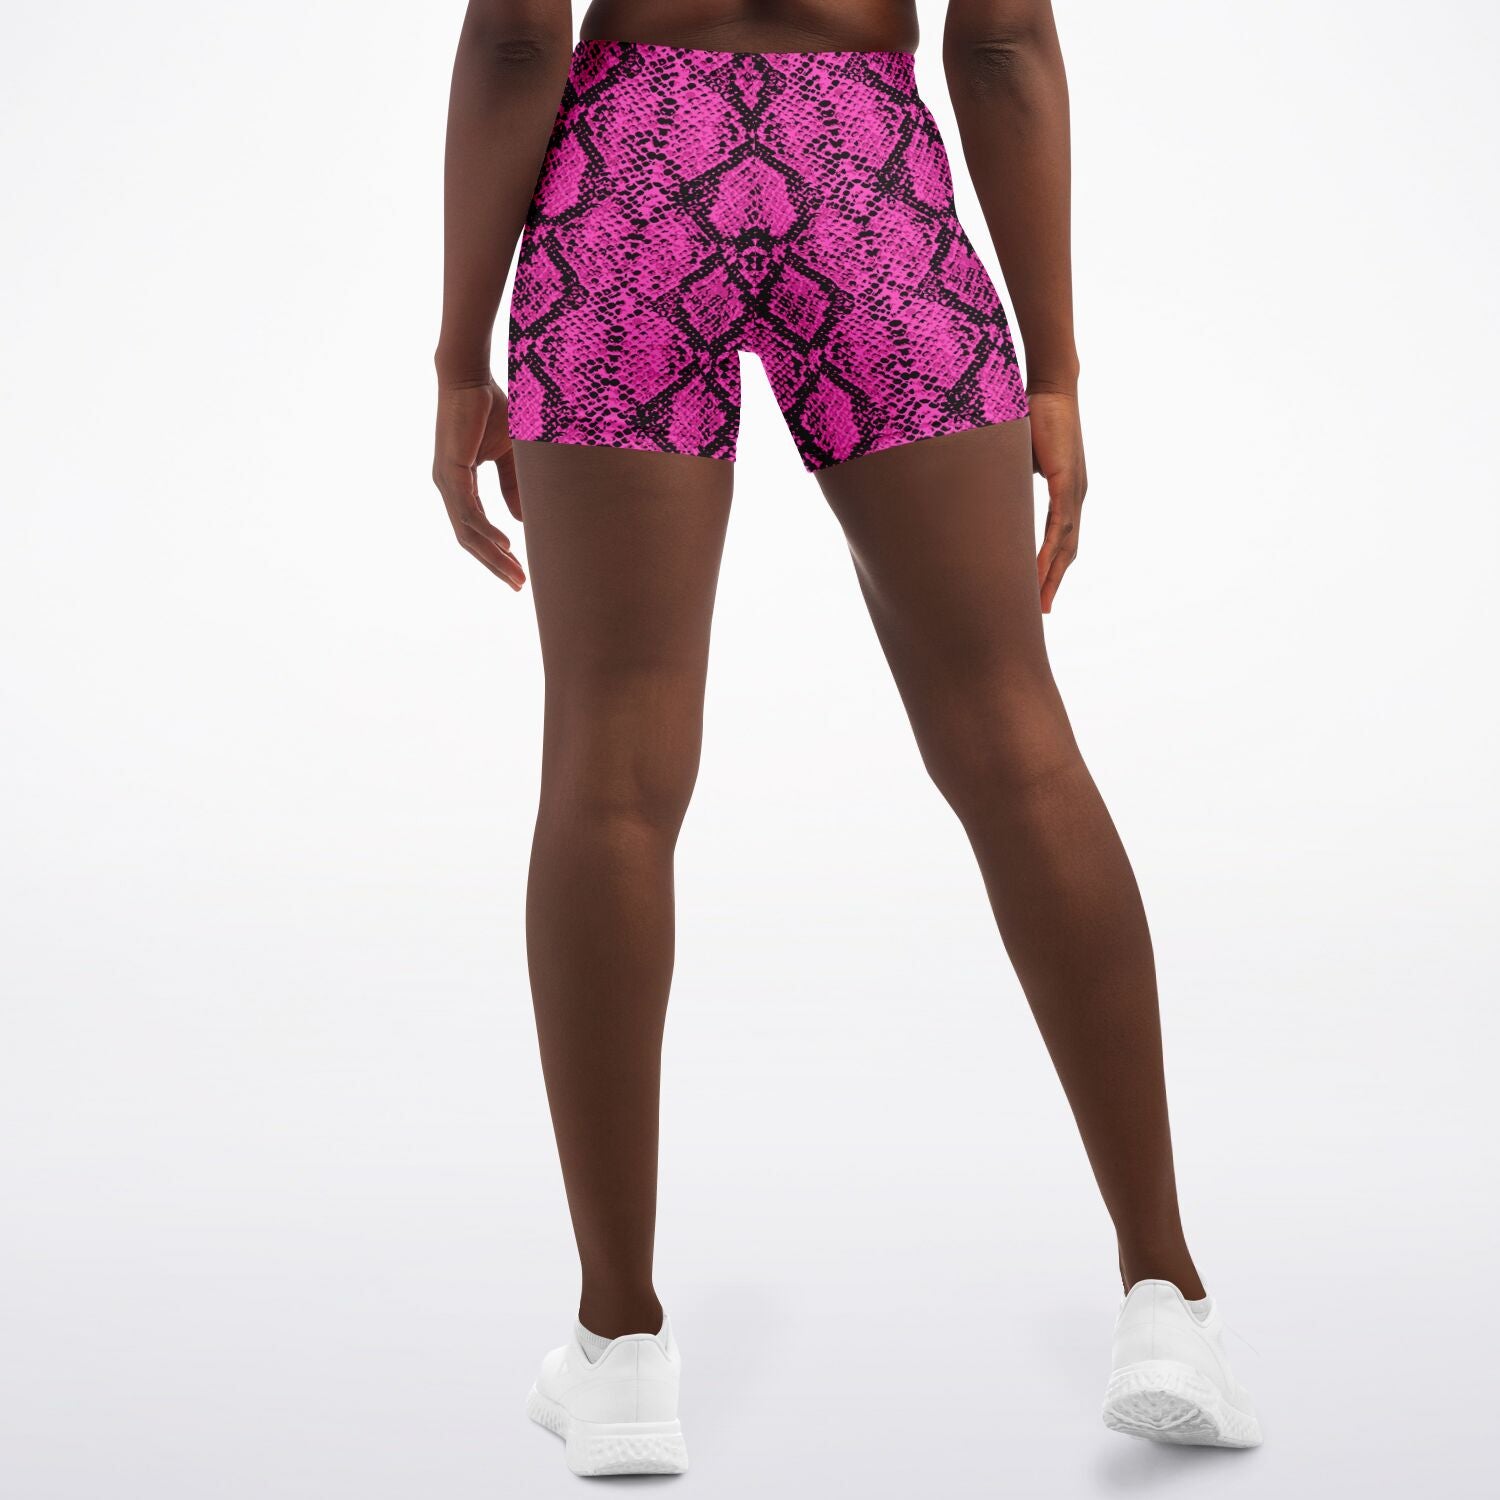 Women's Mid-rise Pink Snakeskin Reptile Print Athletic Booty Shorts